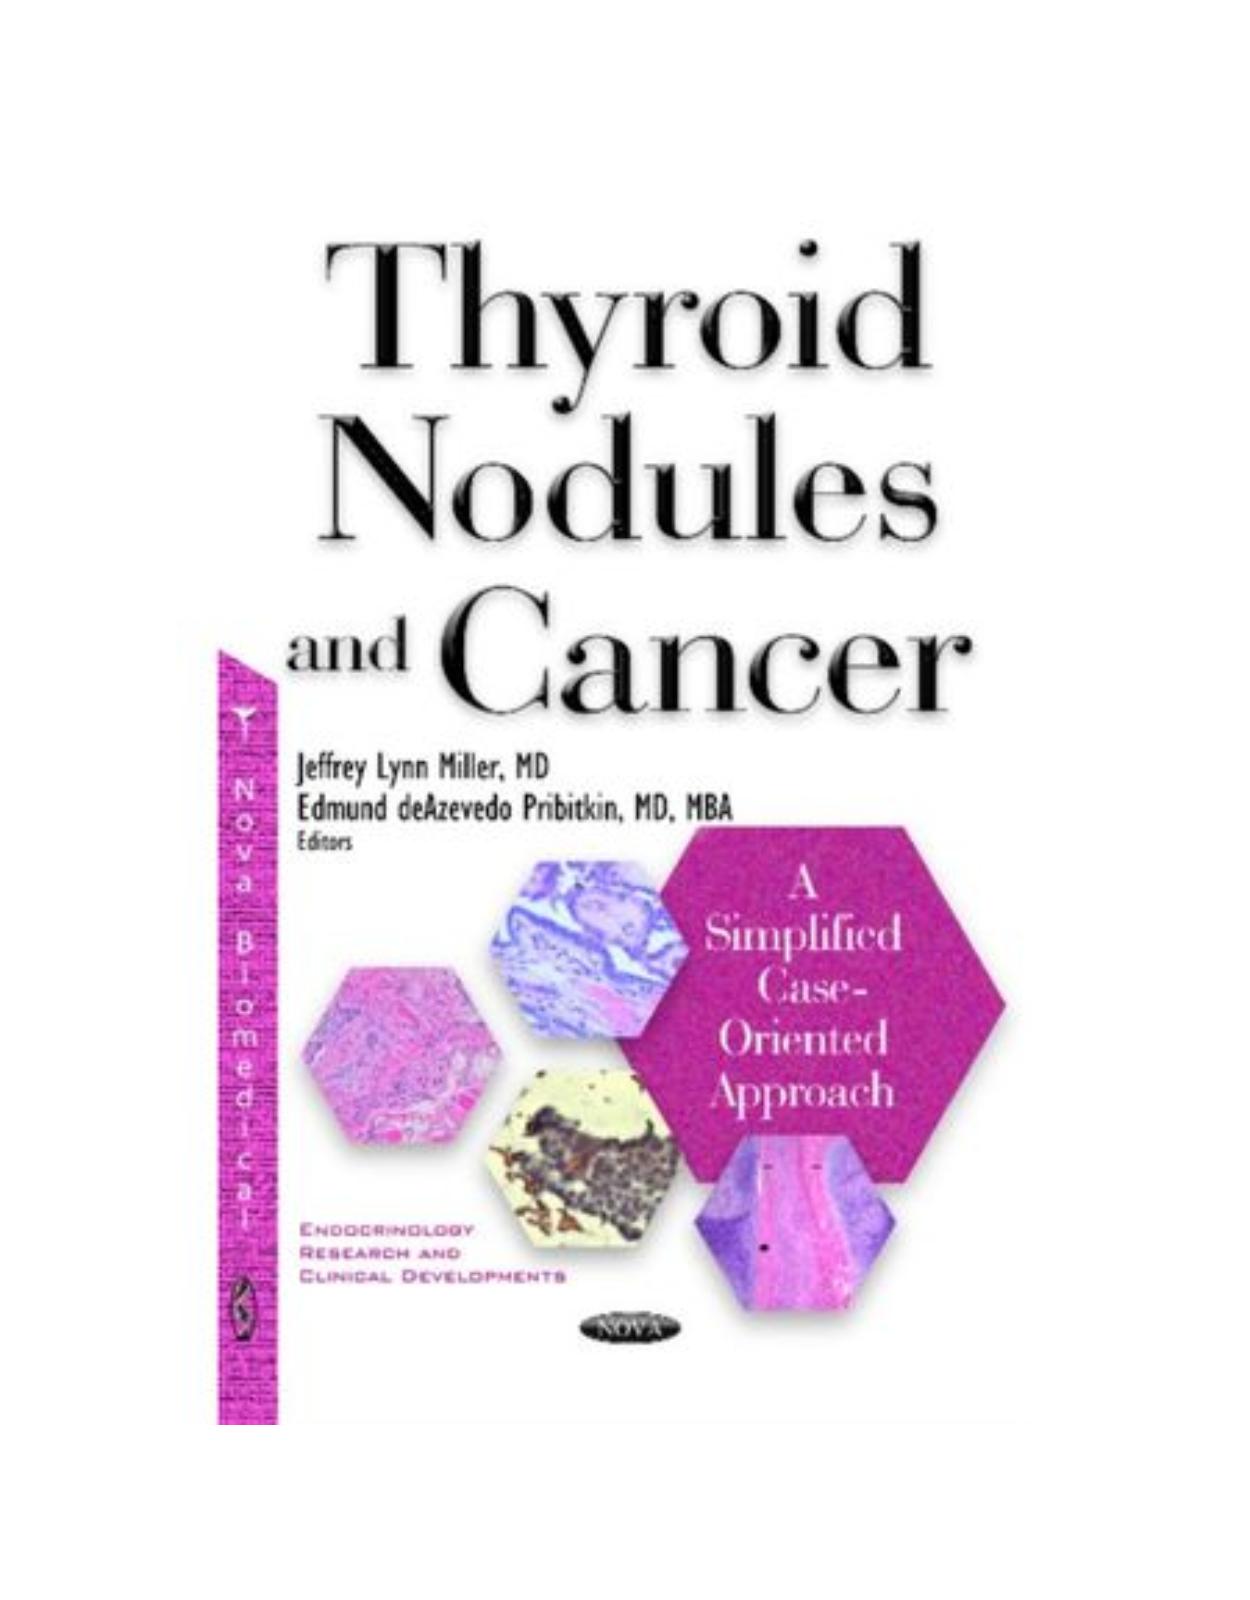 Thyroid Nodules & Cancer: A Simplified Case Oriented Approach